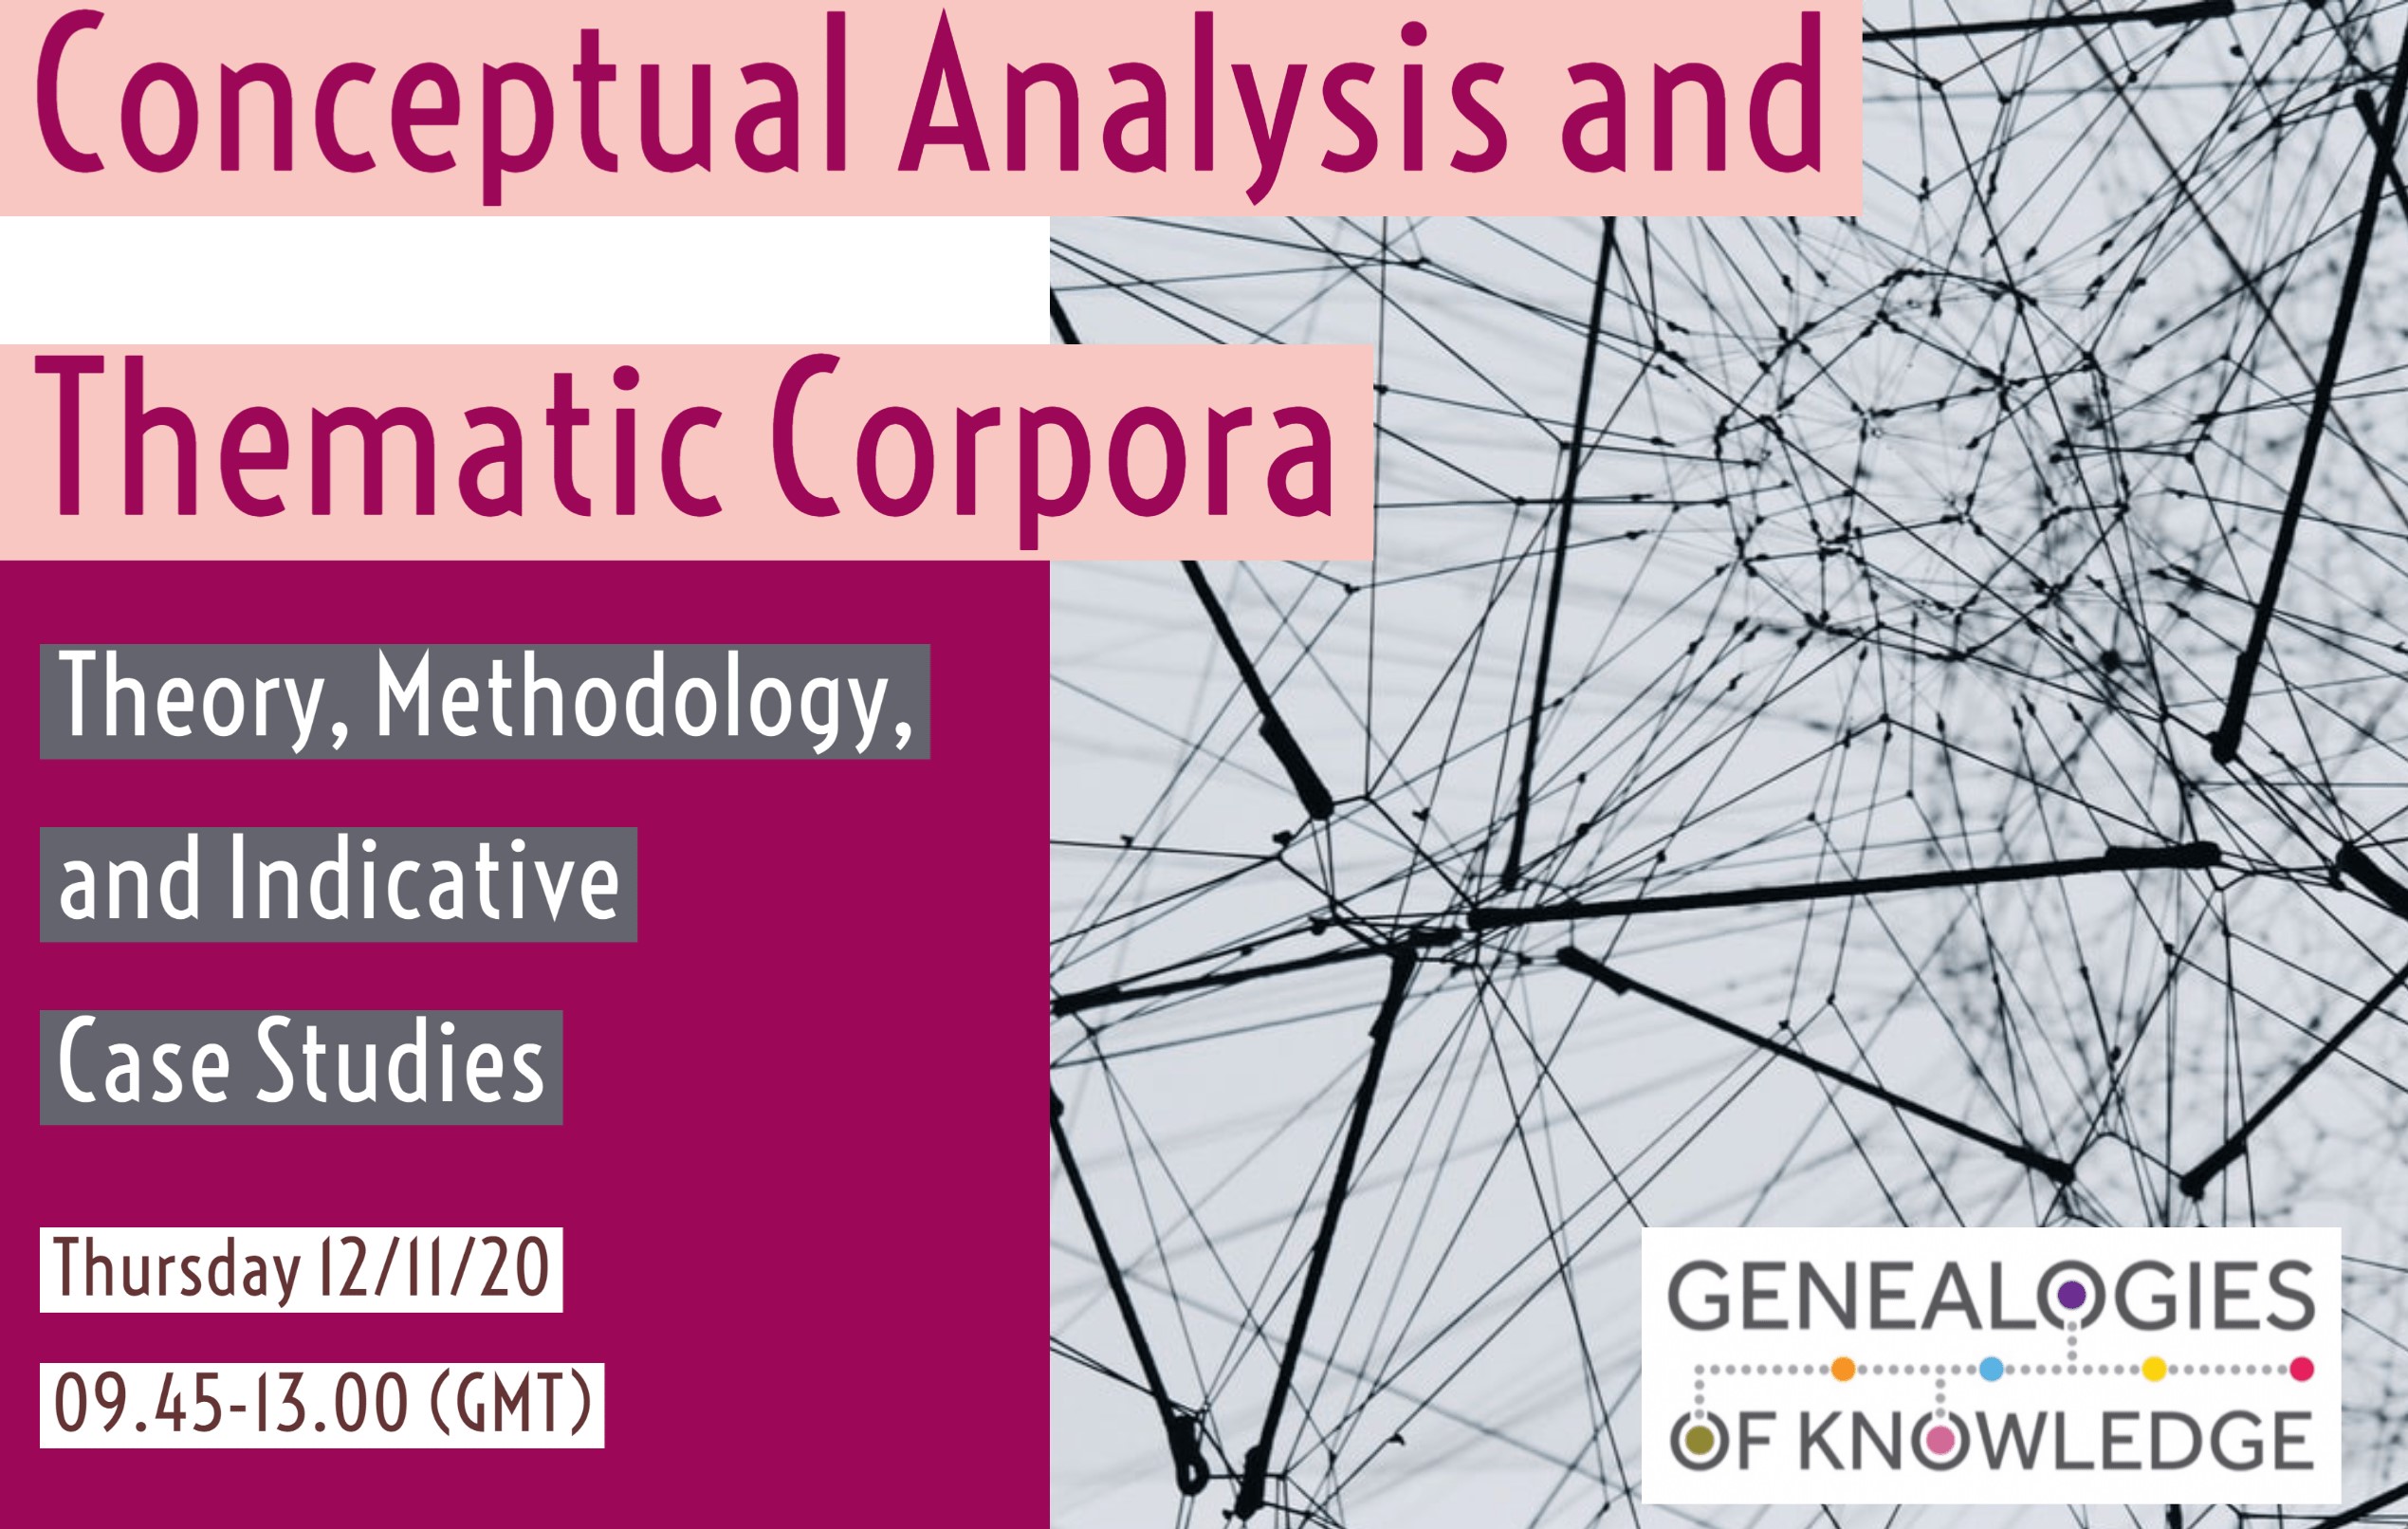 Free webinar event: Conceptual Analysis and Thematic Corpora